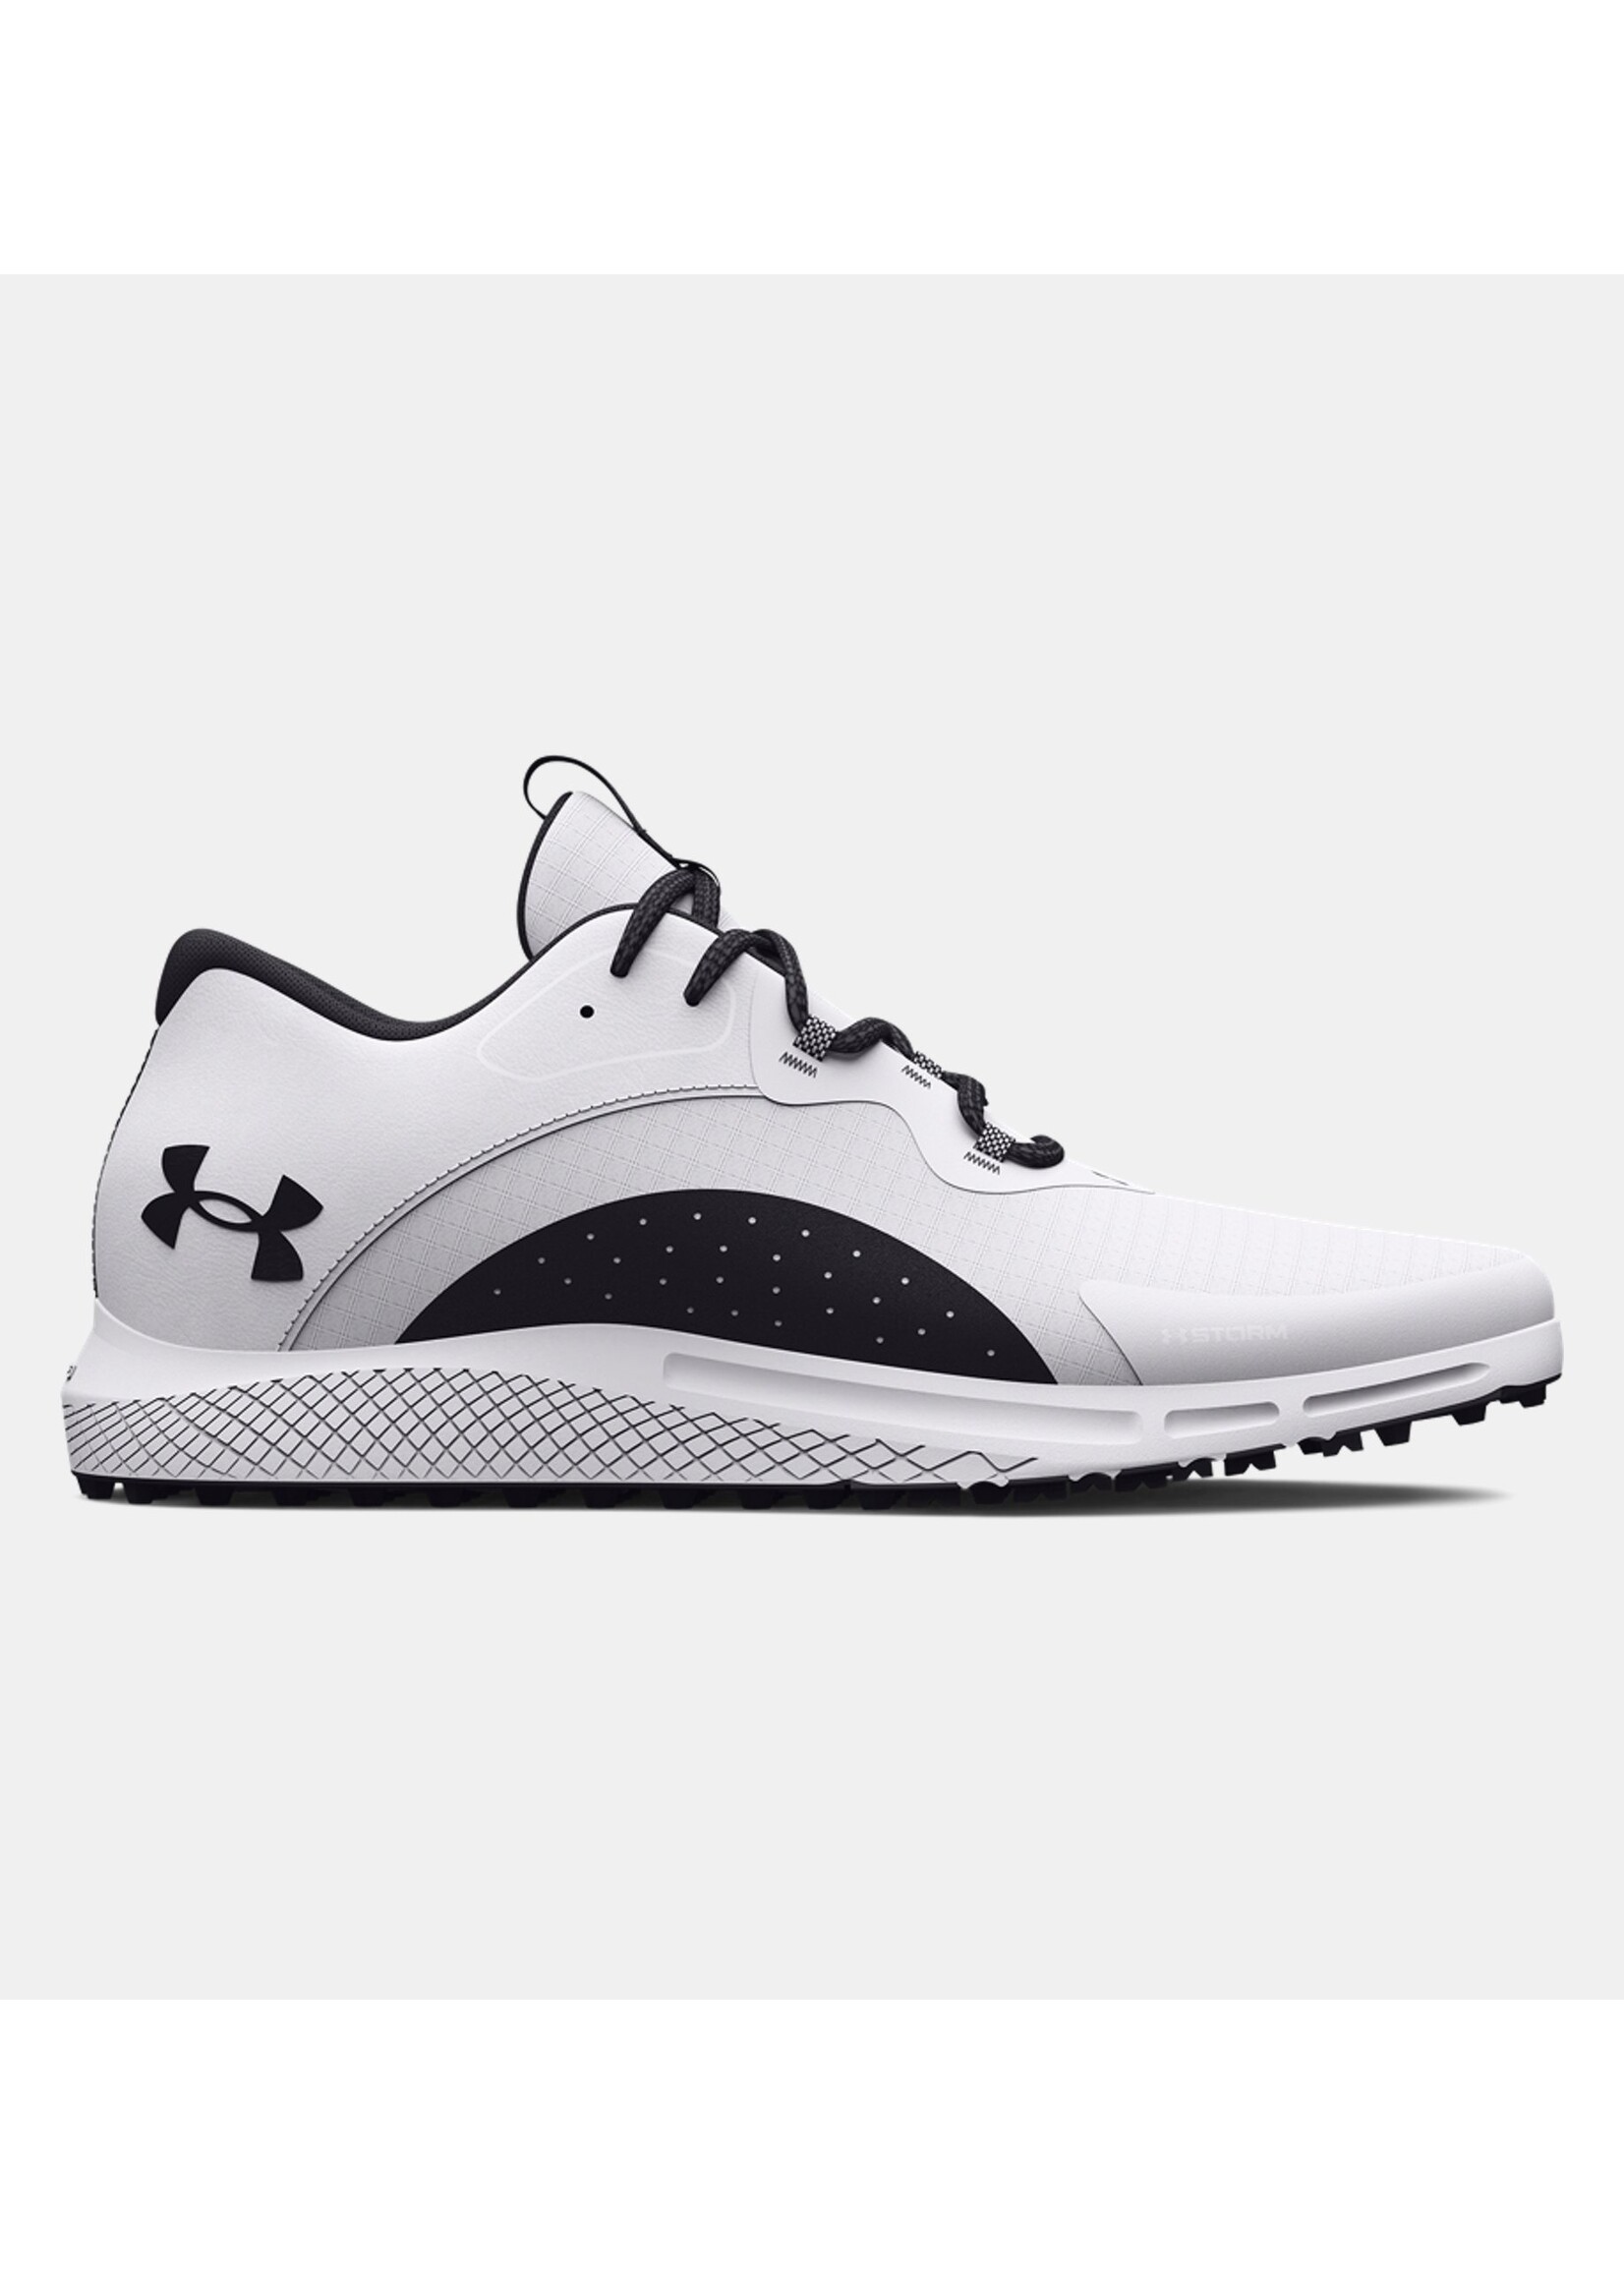 UNDER ARMOUR Men's UA Charged Draw 2 Spikeless Golf Shoes